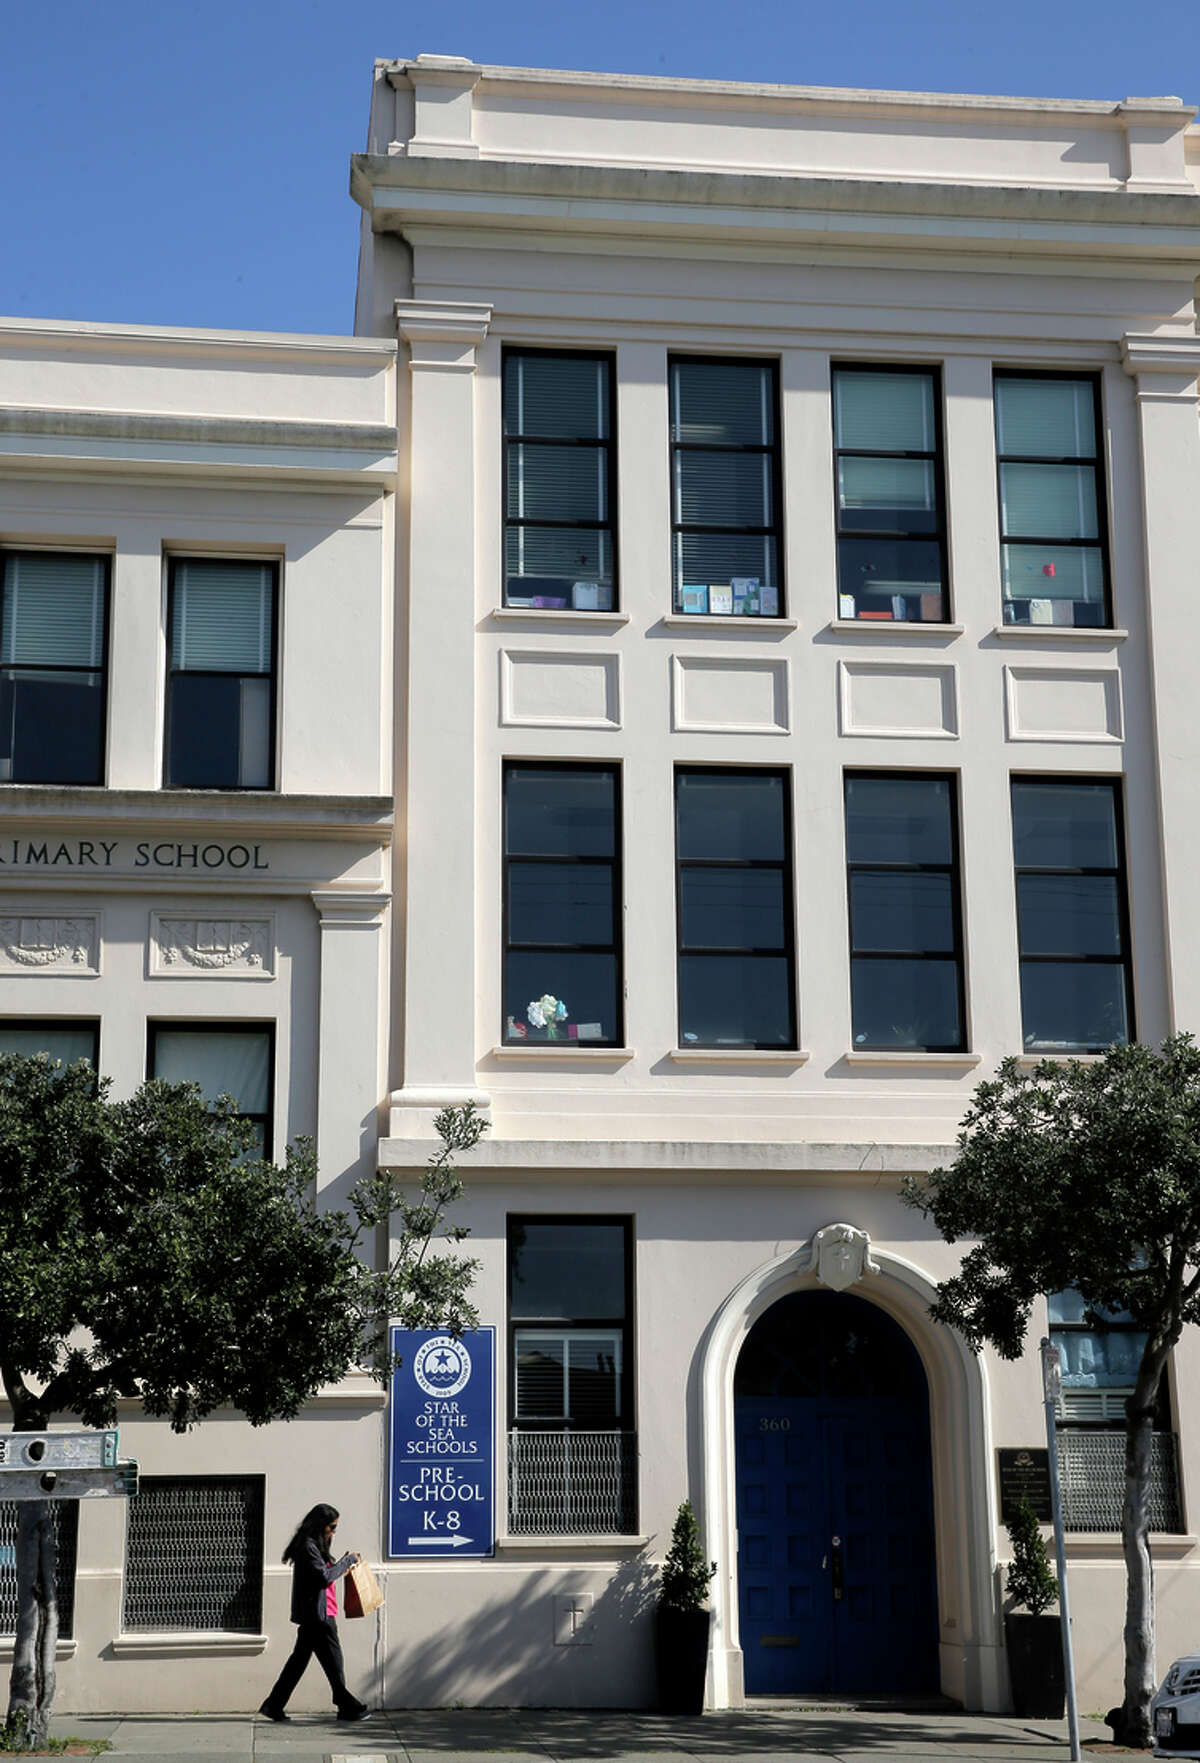 The Star Of The Sea School on 9th Ave. near Geary Blvd. in San Francisco, Ca., Wed. Feb. 18, 2015. Reaction to the Archdiocese of San Francisco distributing a pre-confession document to students at Star of The Sea school that refers to topics that include masturbation, adultery and abortion.